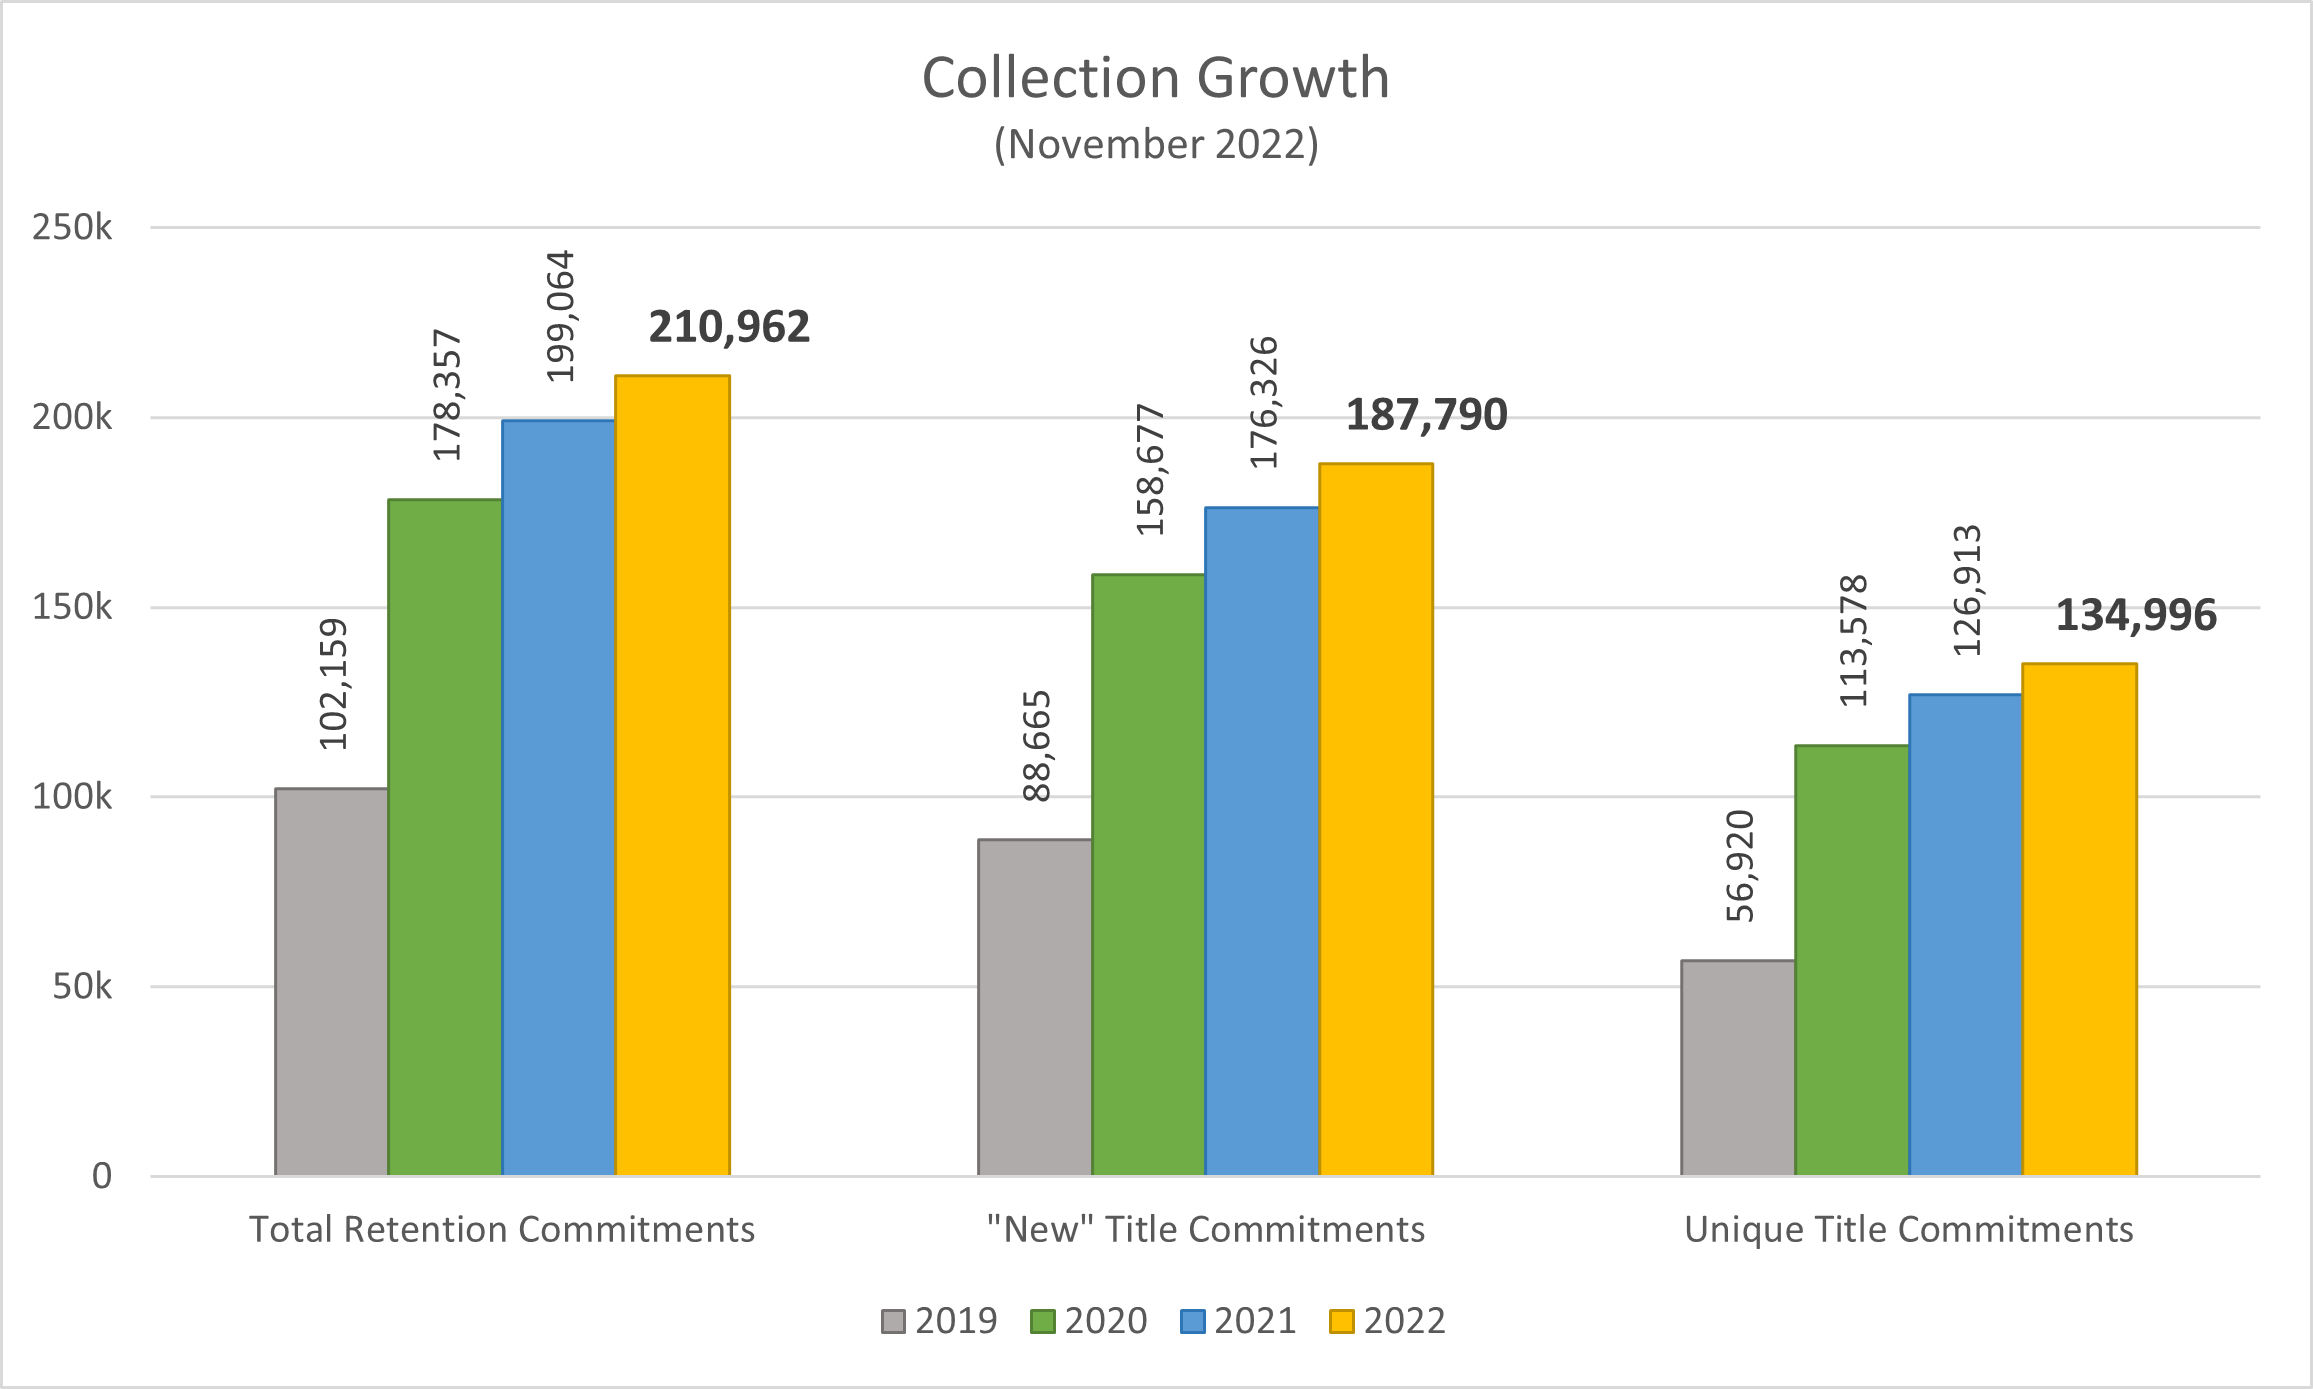 Collection Growth (November 2022): 210,962 total retention commitments; 187,790 "new" title commitments; 134,996 unique title commitments